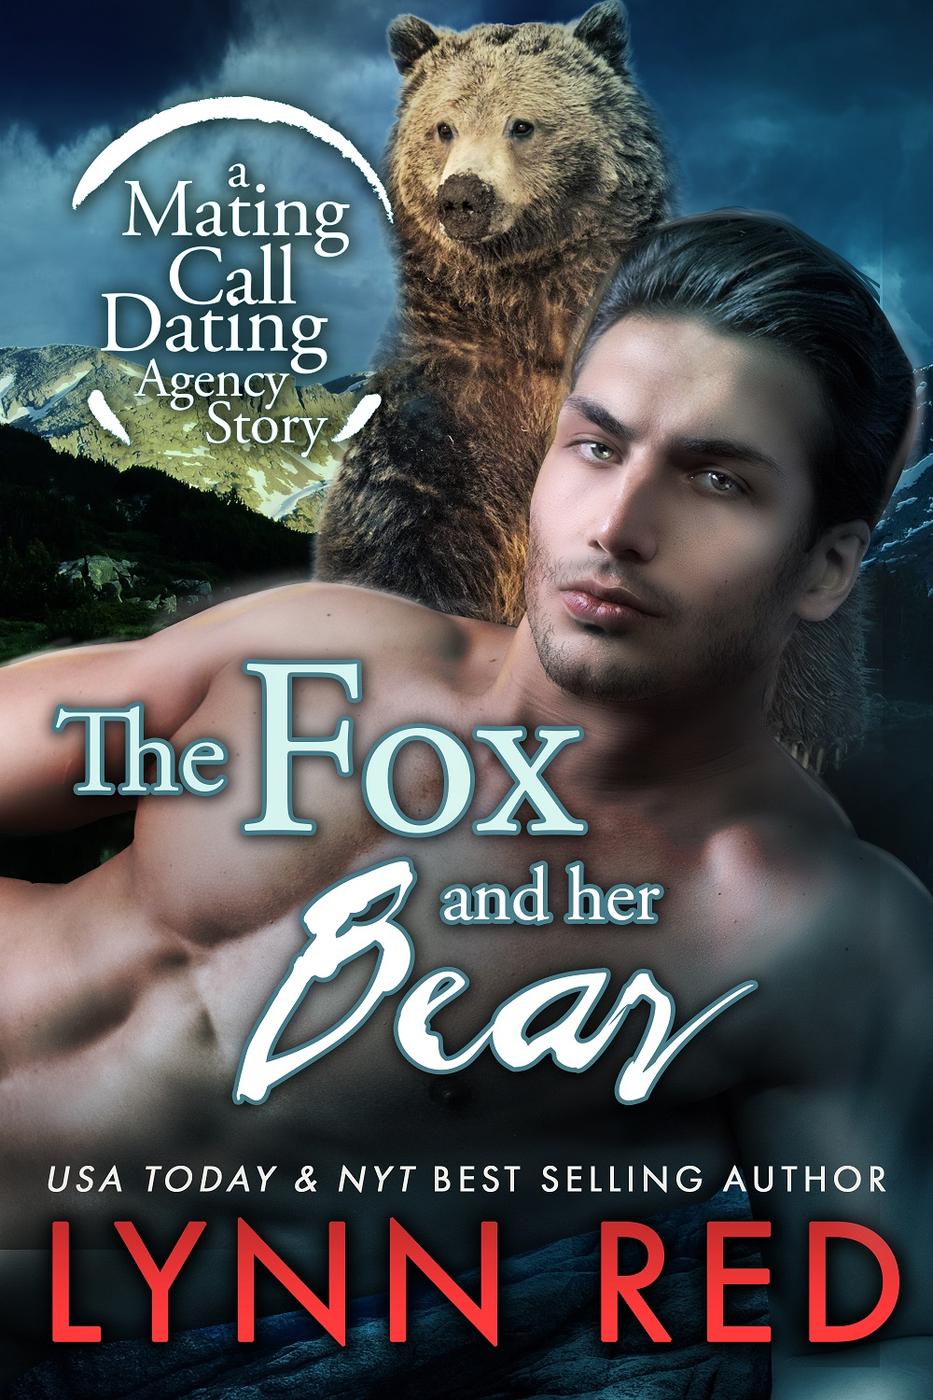 The Fox and her Bear (Mating Call Dating Agency, #2)